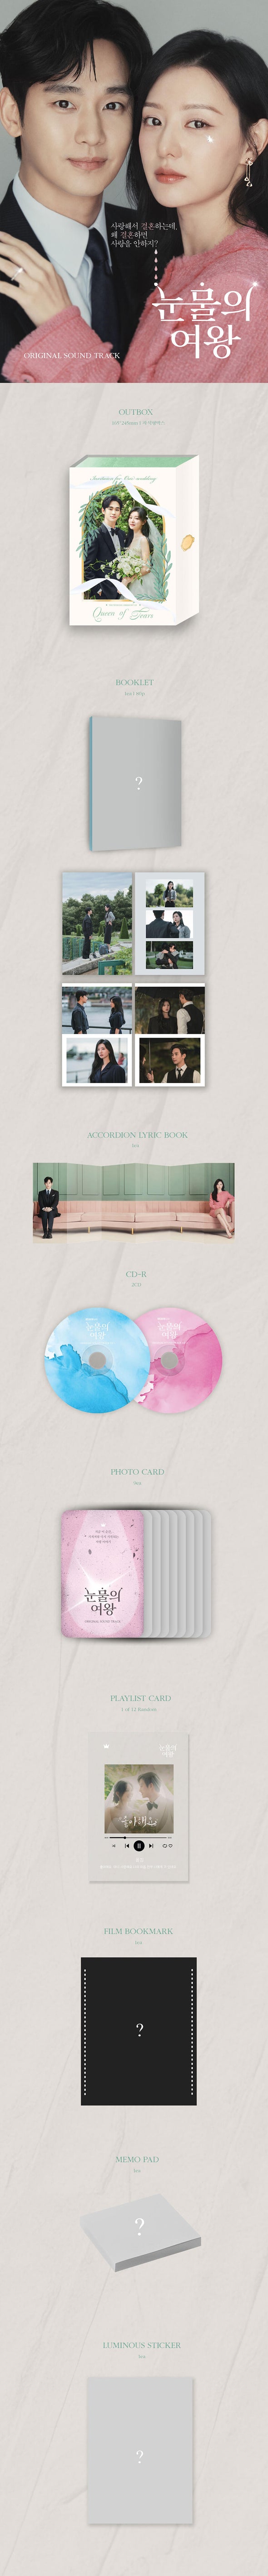 [PRE-ORDER] Queen of Tears OST 눈물의 여왕